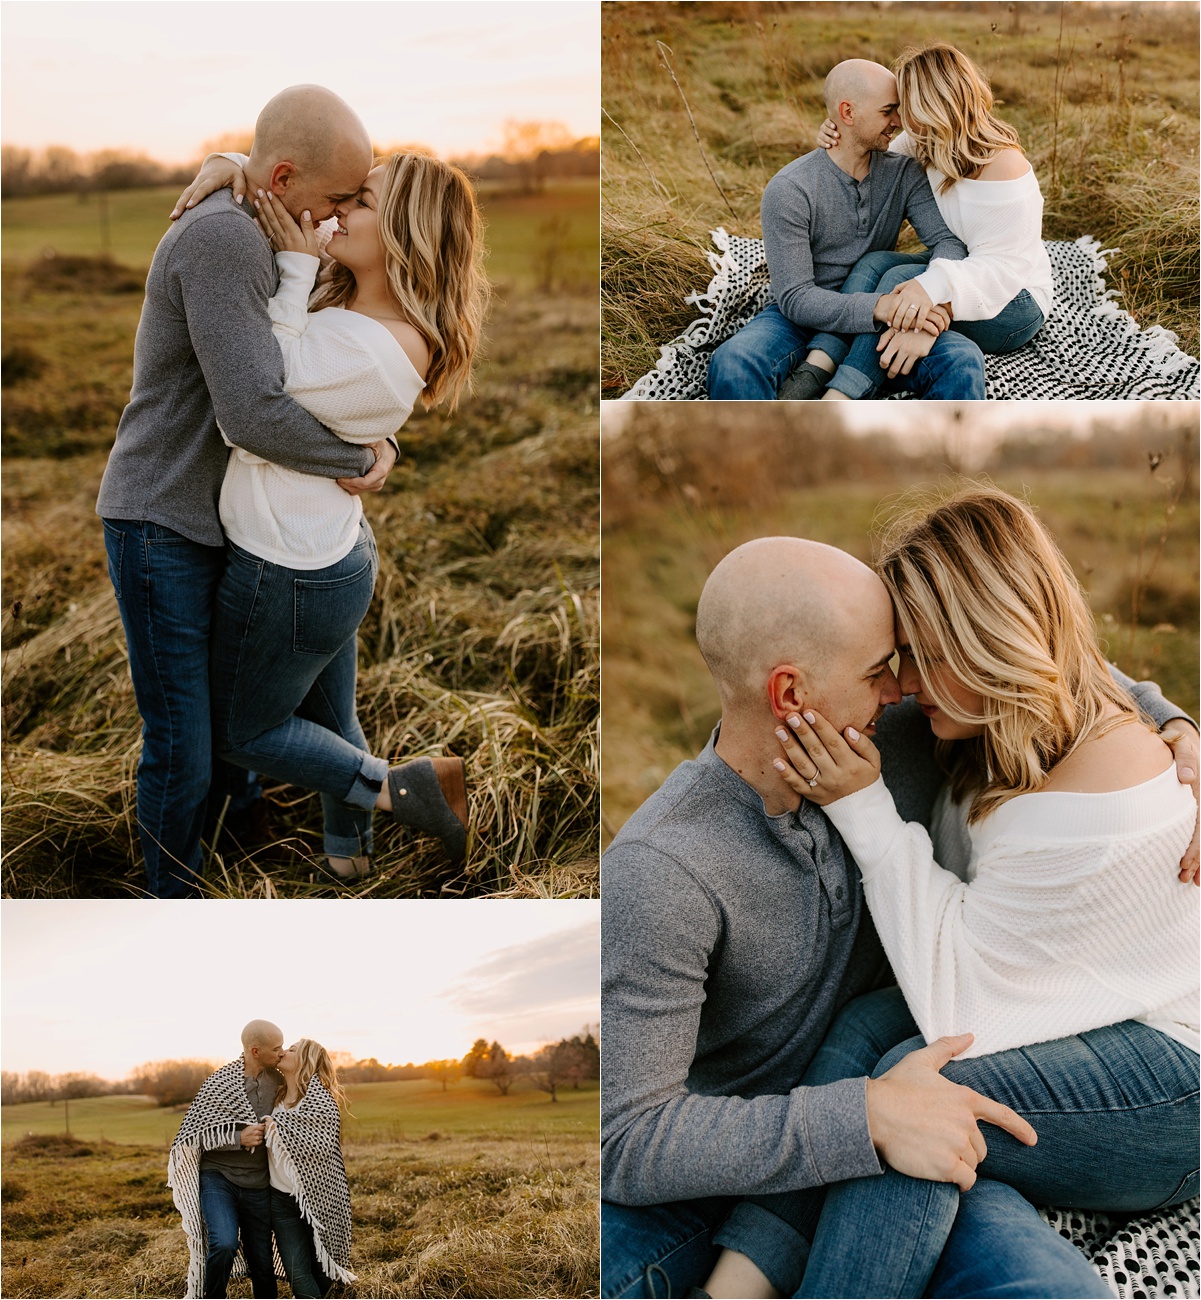 Kankakee, IL Fall Engagement Session at Sunset. Krystal Richmond Photography